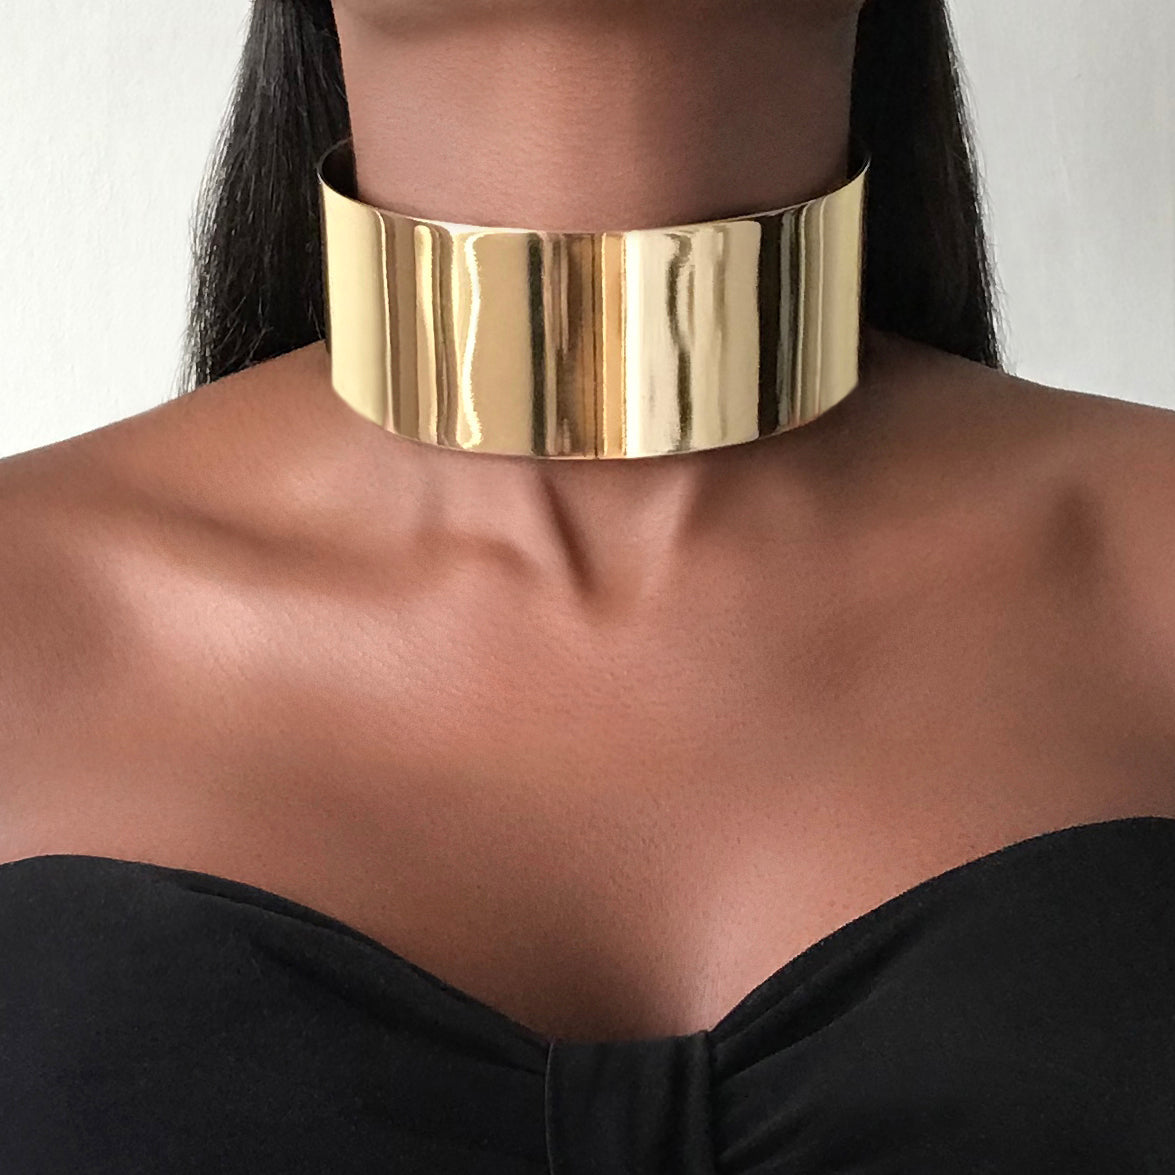 Cleopatra Gold Statement Necklace